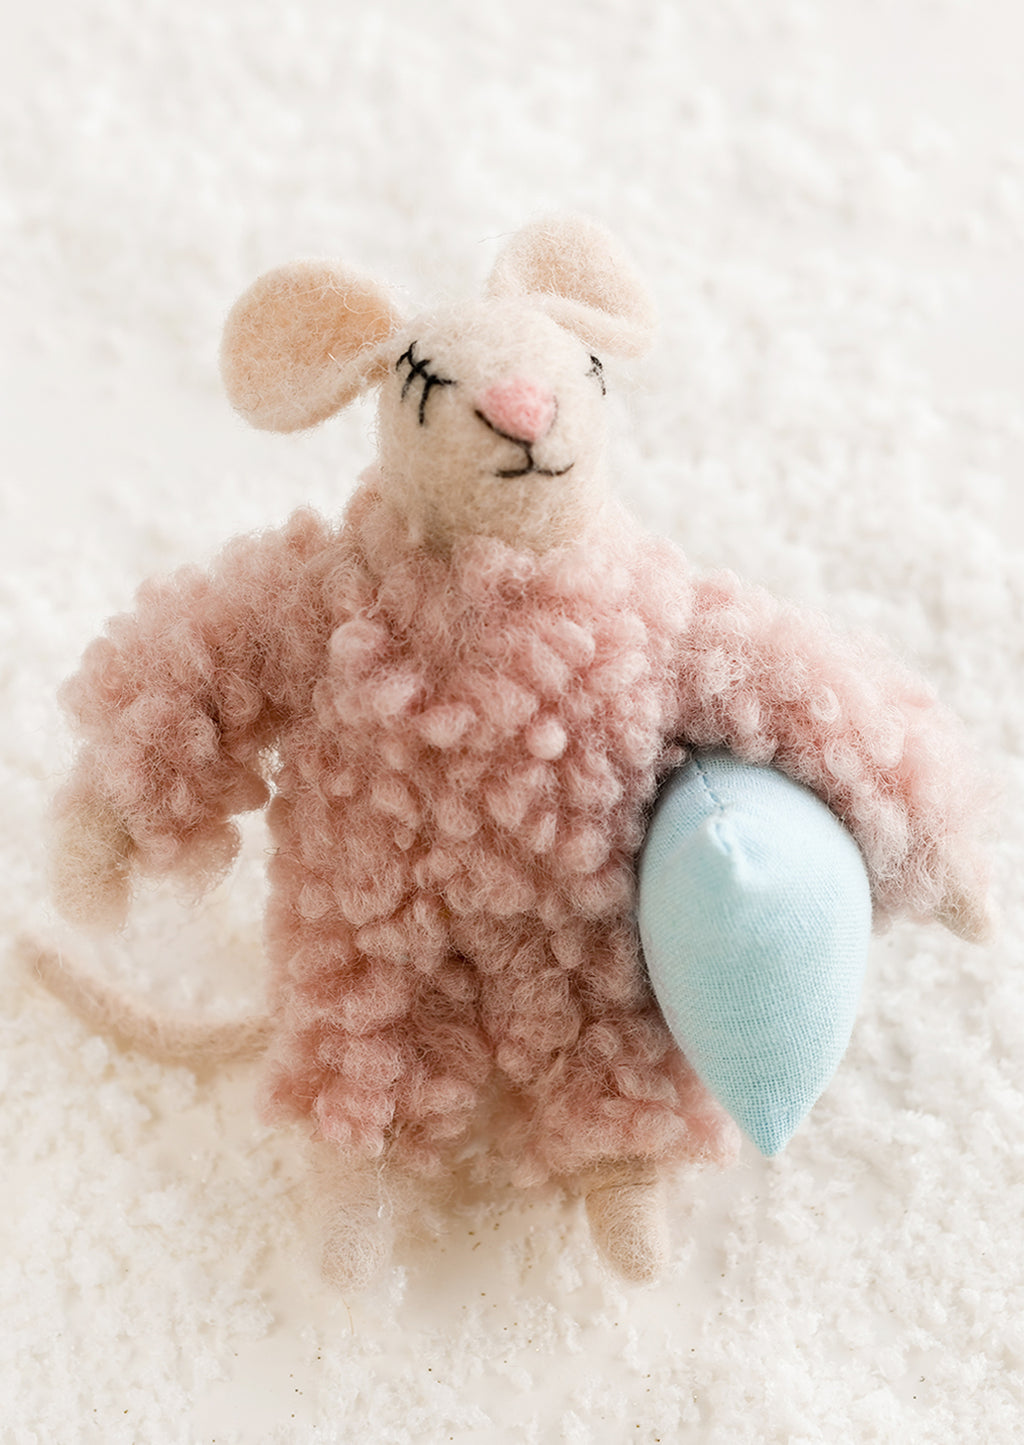 Pillow: A felted mouse ornament in pink fuzzy pajamas, holding a blue pillow.